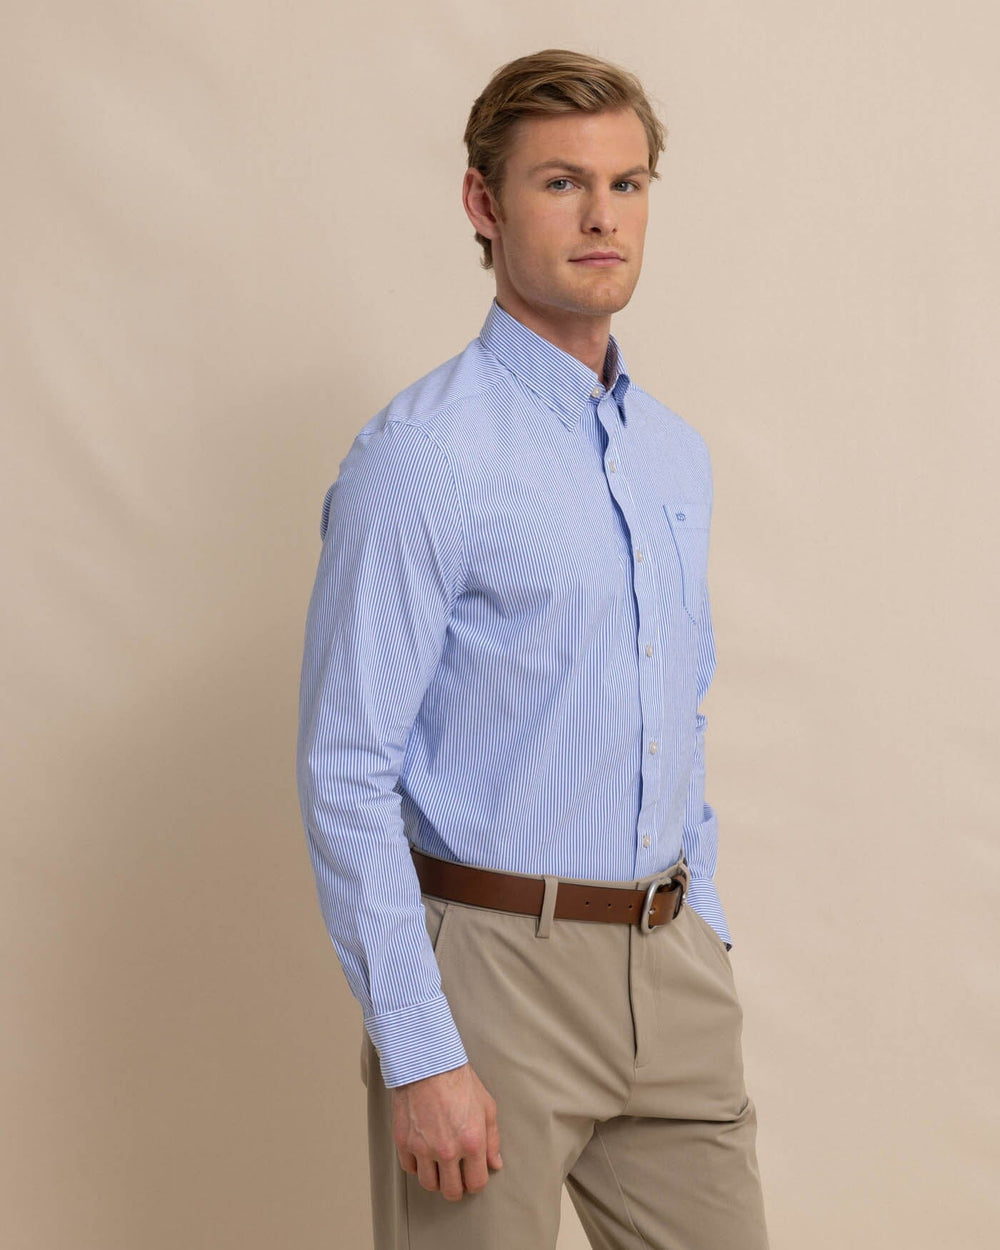 The front view of the Southern Tide Charleston Granby Stripe Long Sleeve Sport Shirt by Southern Tide - Cobalt Blue